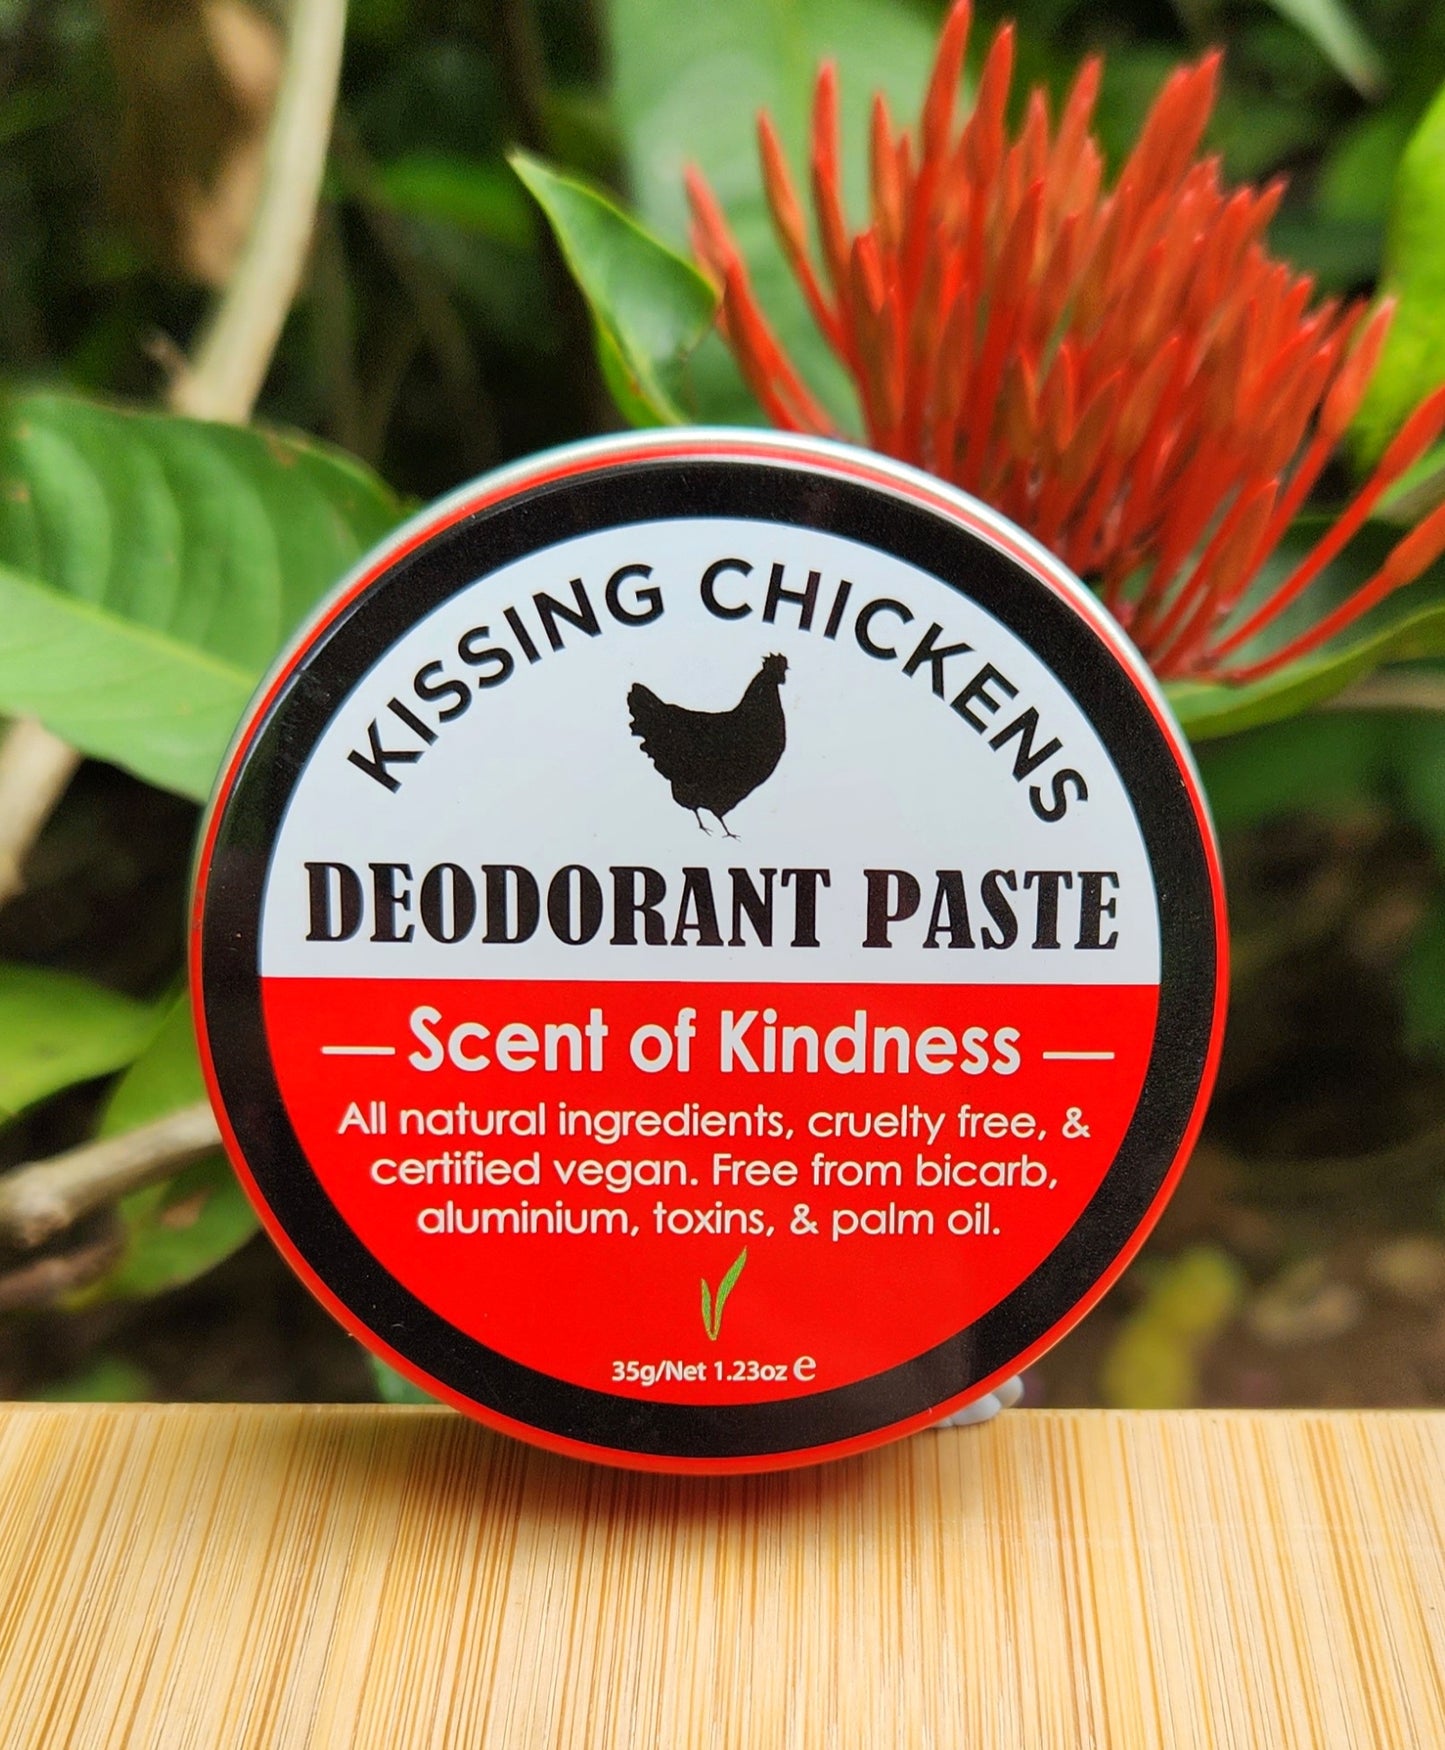 Kissing Chickens Bicarb-Free Natural Deodorant Paste - Scent of Kindness 35g tin